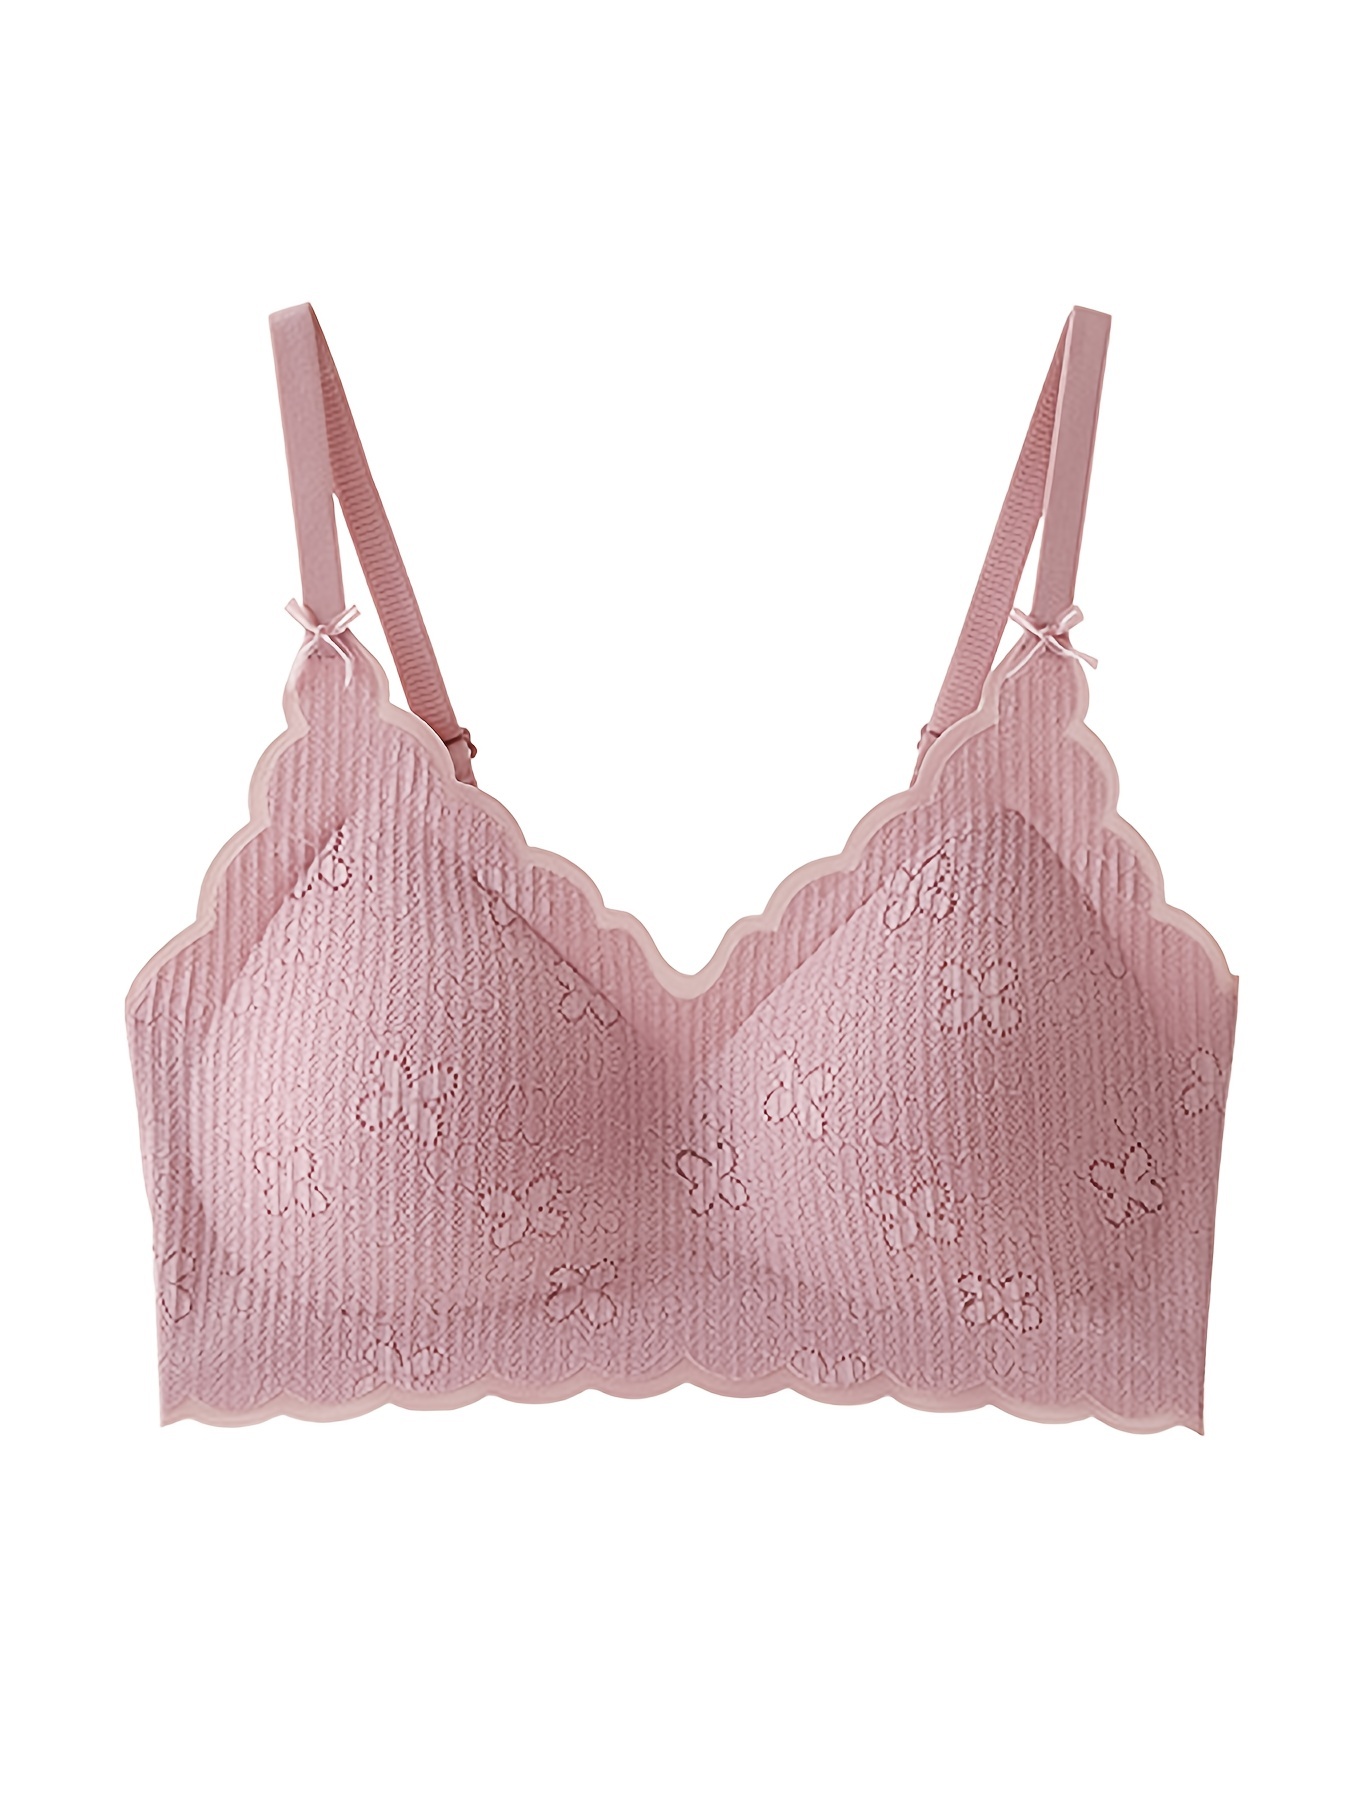 French Macaron Lace Bras For Side Set For Girls Romantic, Cute